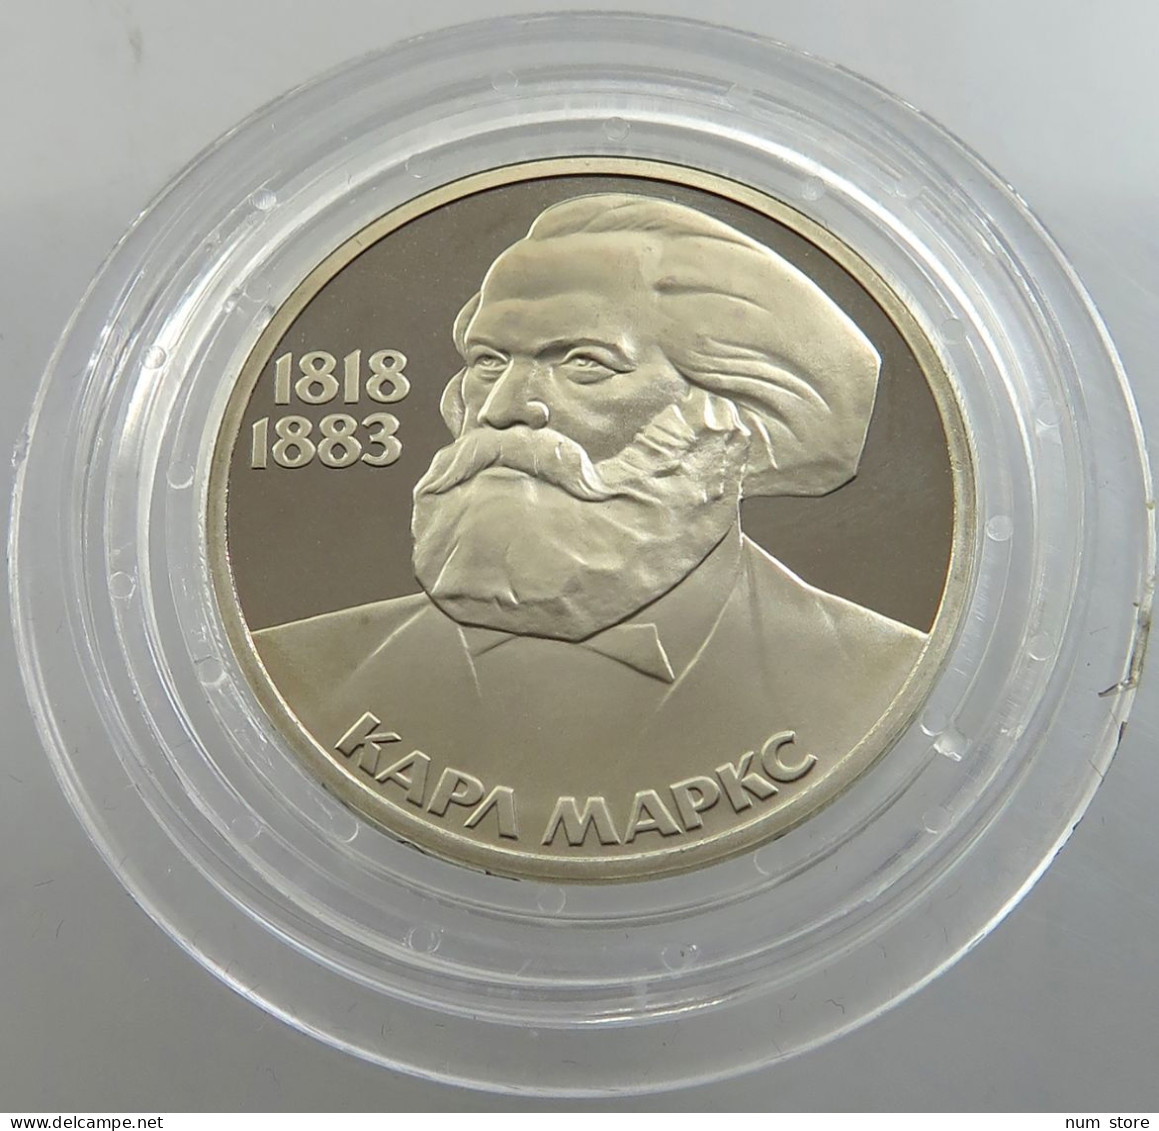 RUSSIA USSR 1 ROUBLE 1983 1988 MARX PROOF #sm14 0333 - Rusland